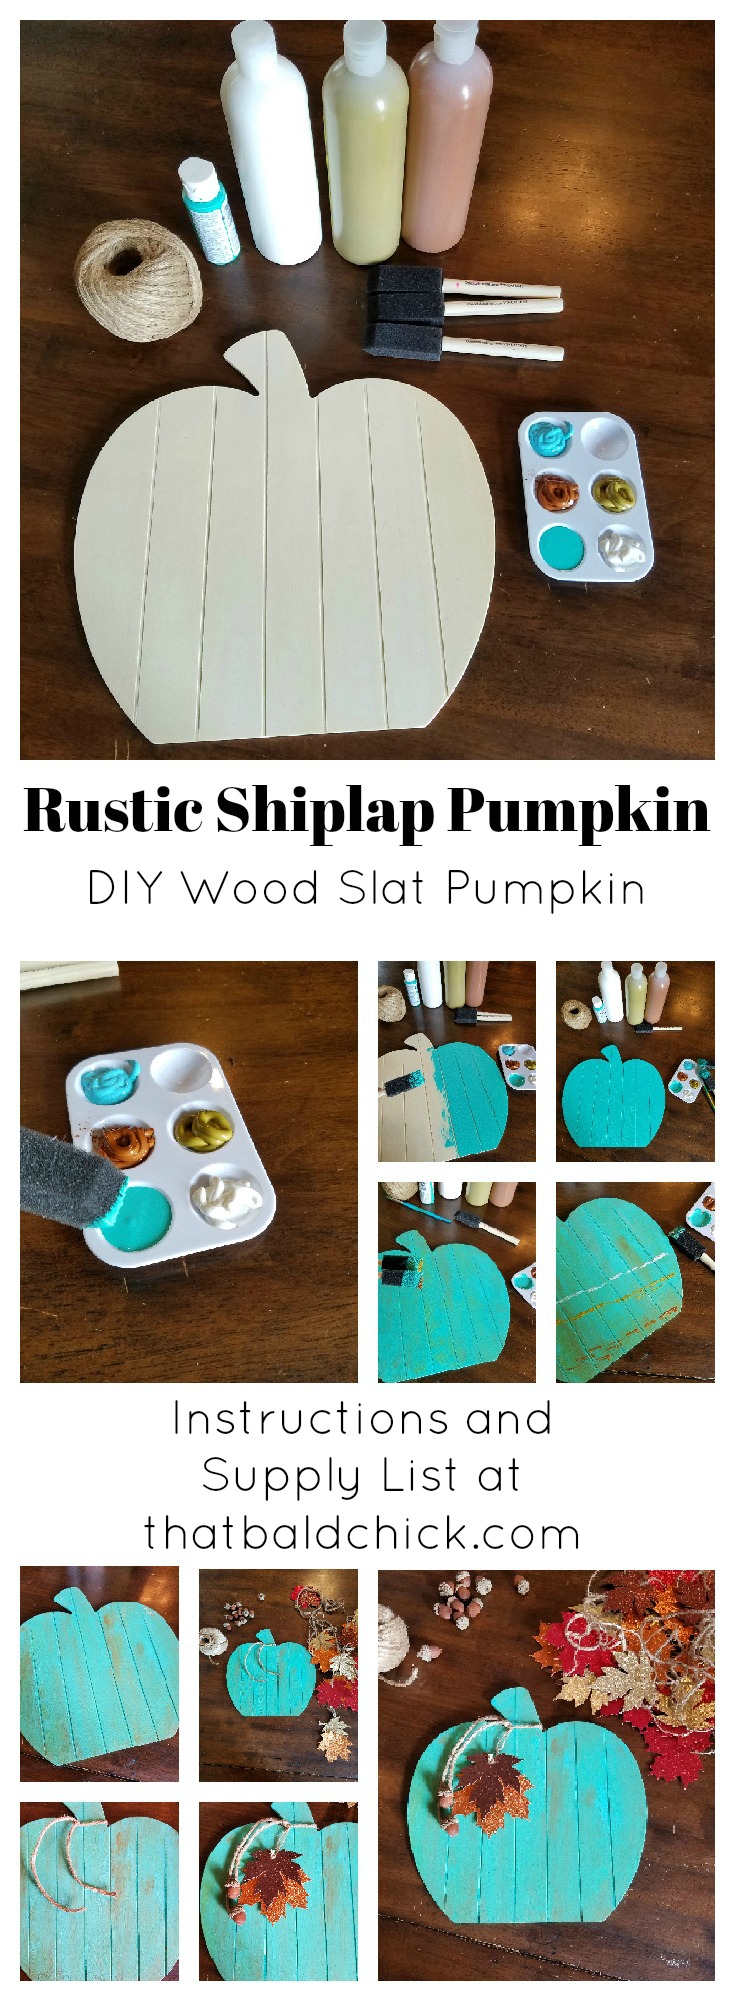 Display this teal rustic shiplap pumpkin on your door to alert visitors that your home is allergy safe this season. Supply list and instructions at thatbaldchick.com